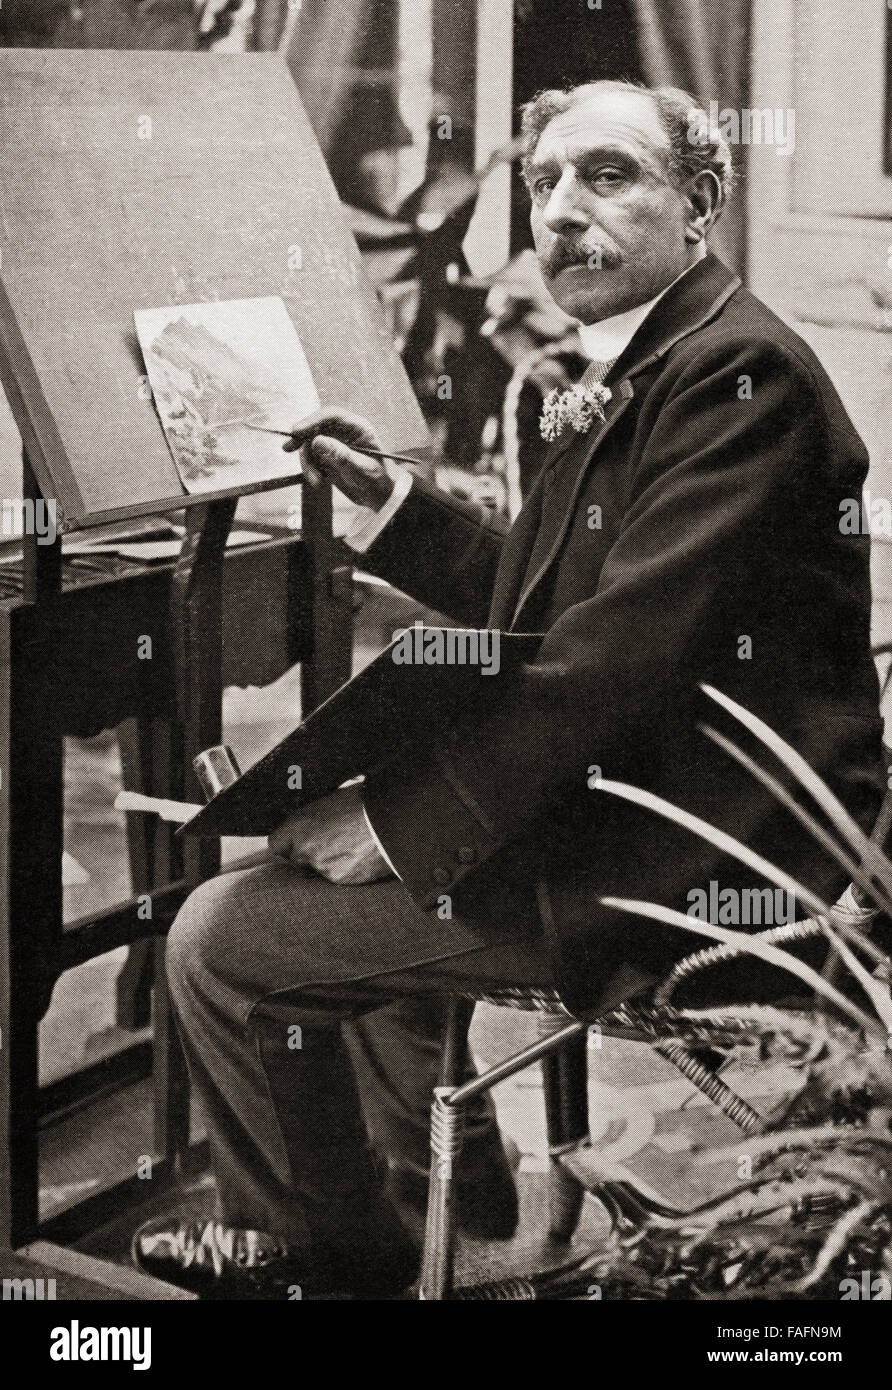 Joseph Nathaniel Lyons, 1847-1917.  Professional artist and co-founder of J. Lyons & Co., the British restaurant-chain, food-manufacturing, hotel conglomerate and the famous Lyon's Tea Houses. Stock Photo